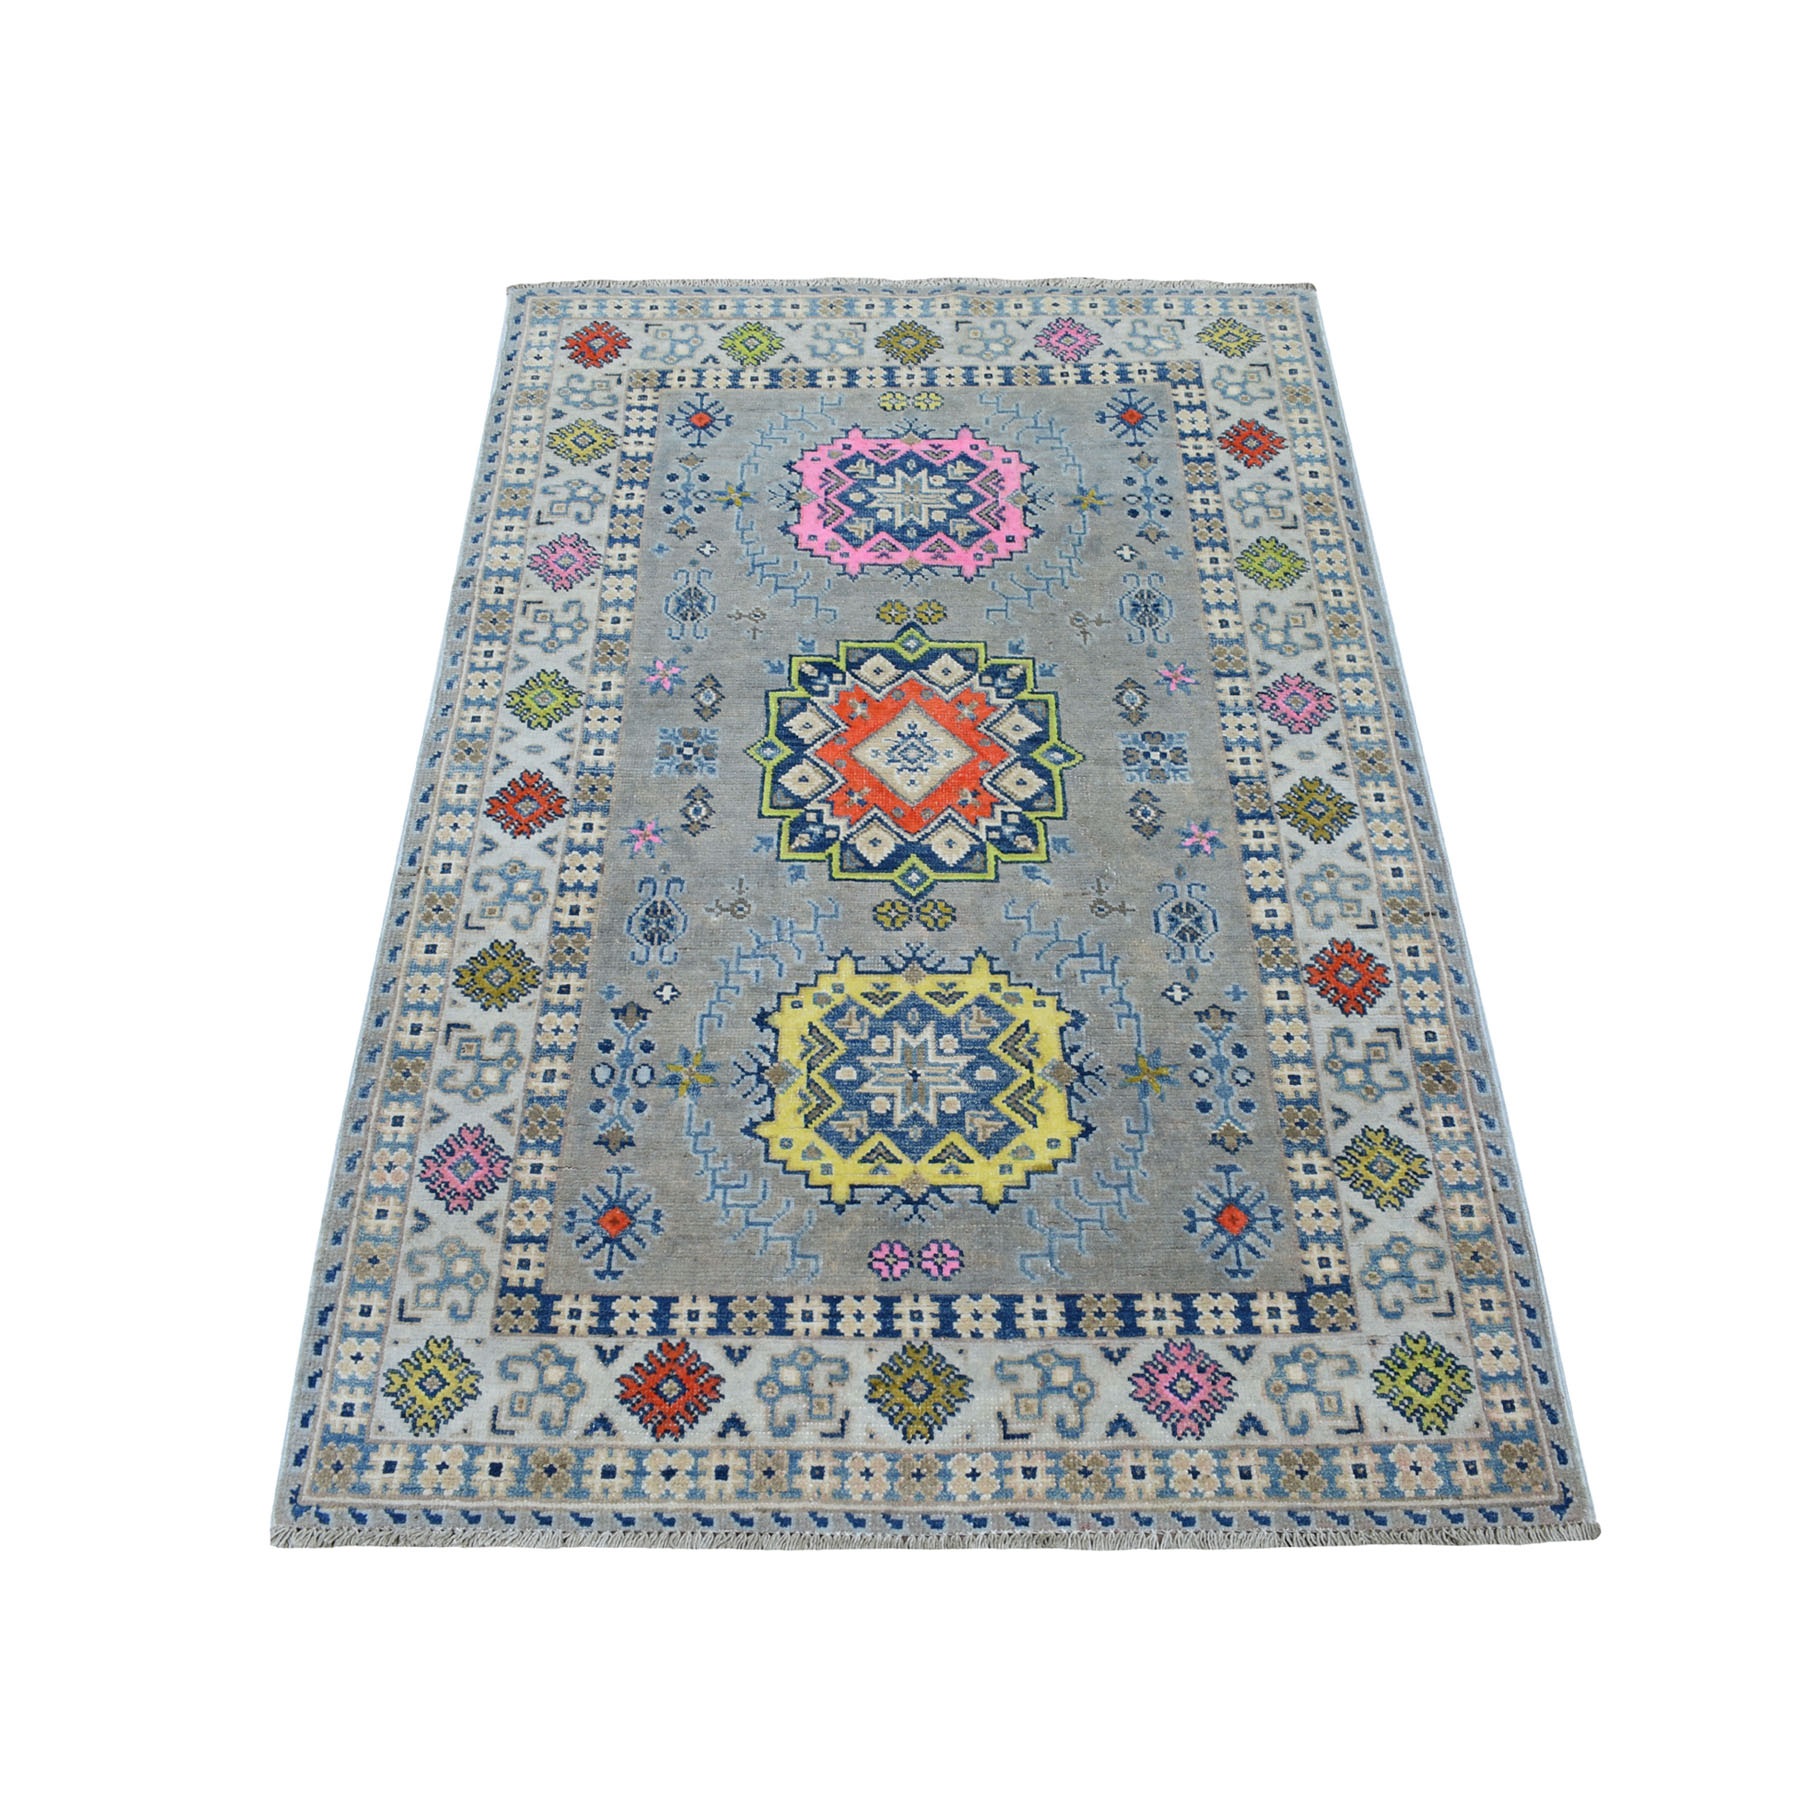 3'3"X5' Colorful Gray Fusion Kazak Pure Wool Geometric Design Hand Knotted Oriental Rug moaeced0